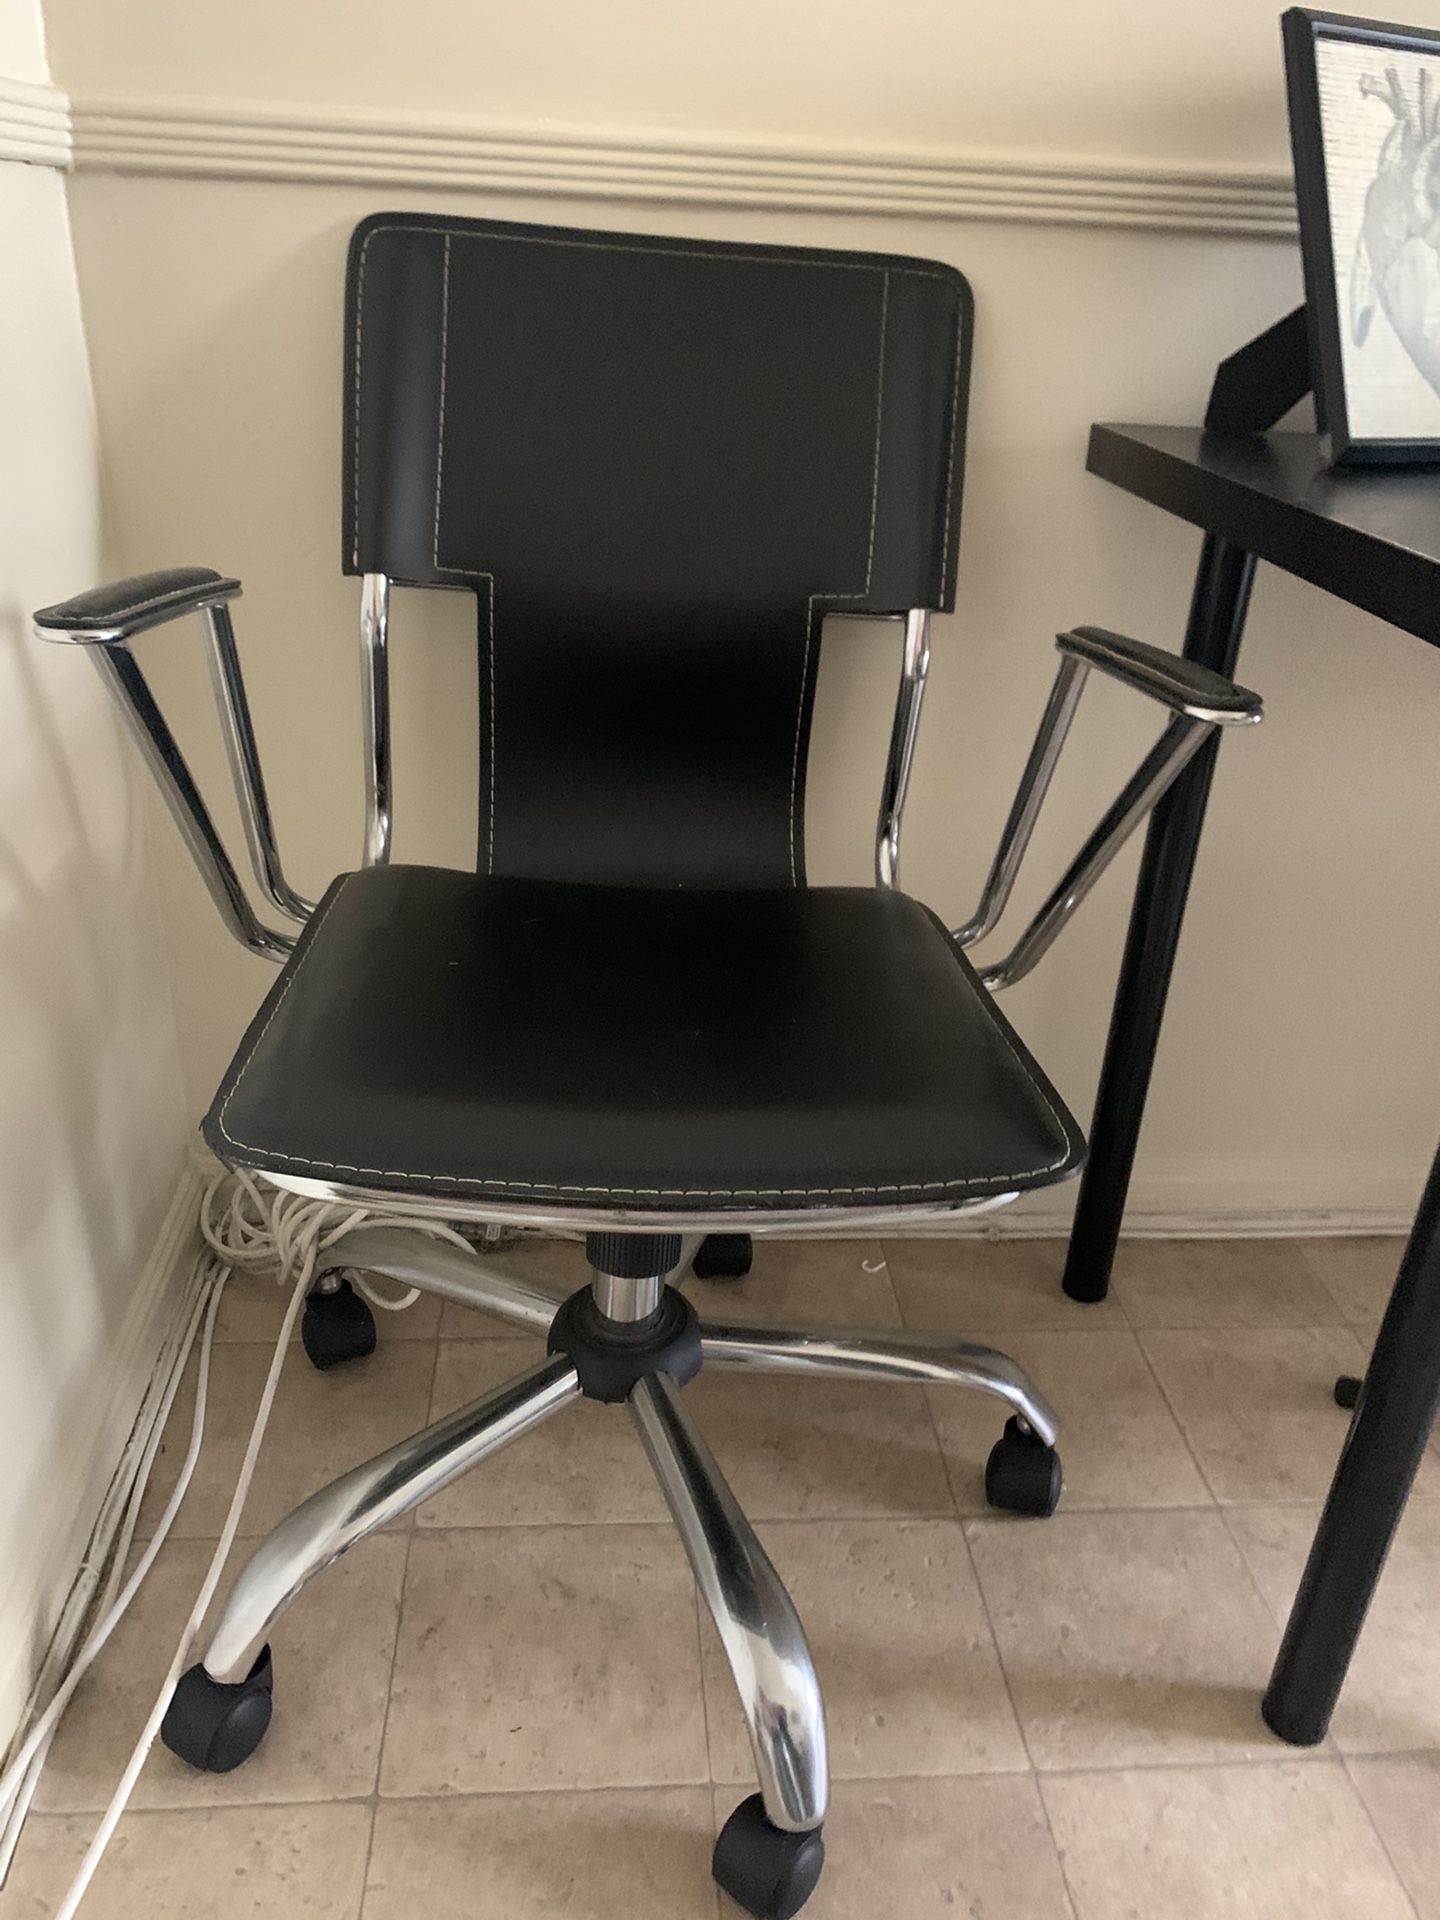 Black and silver desk chair